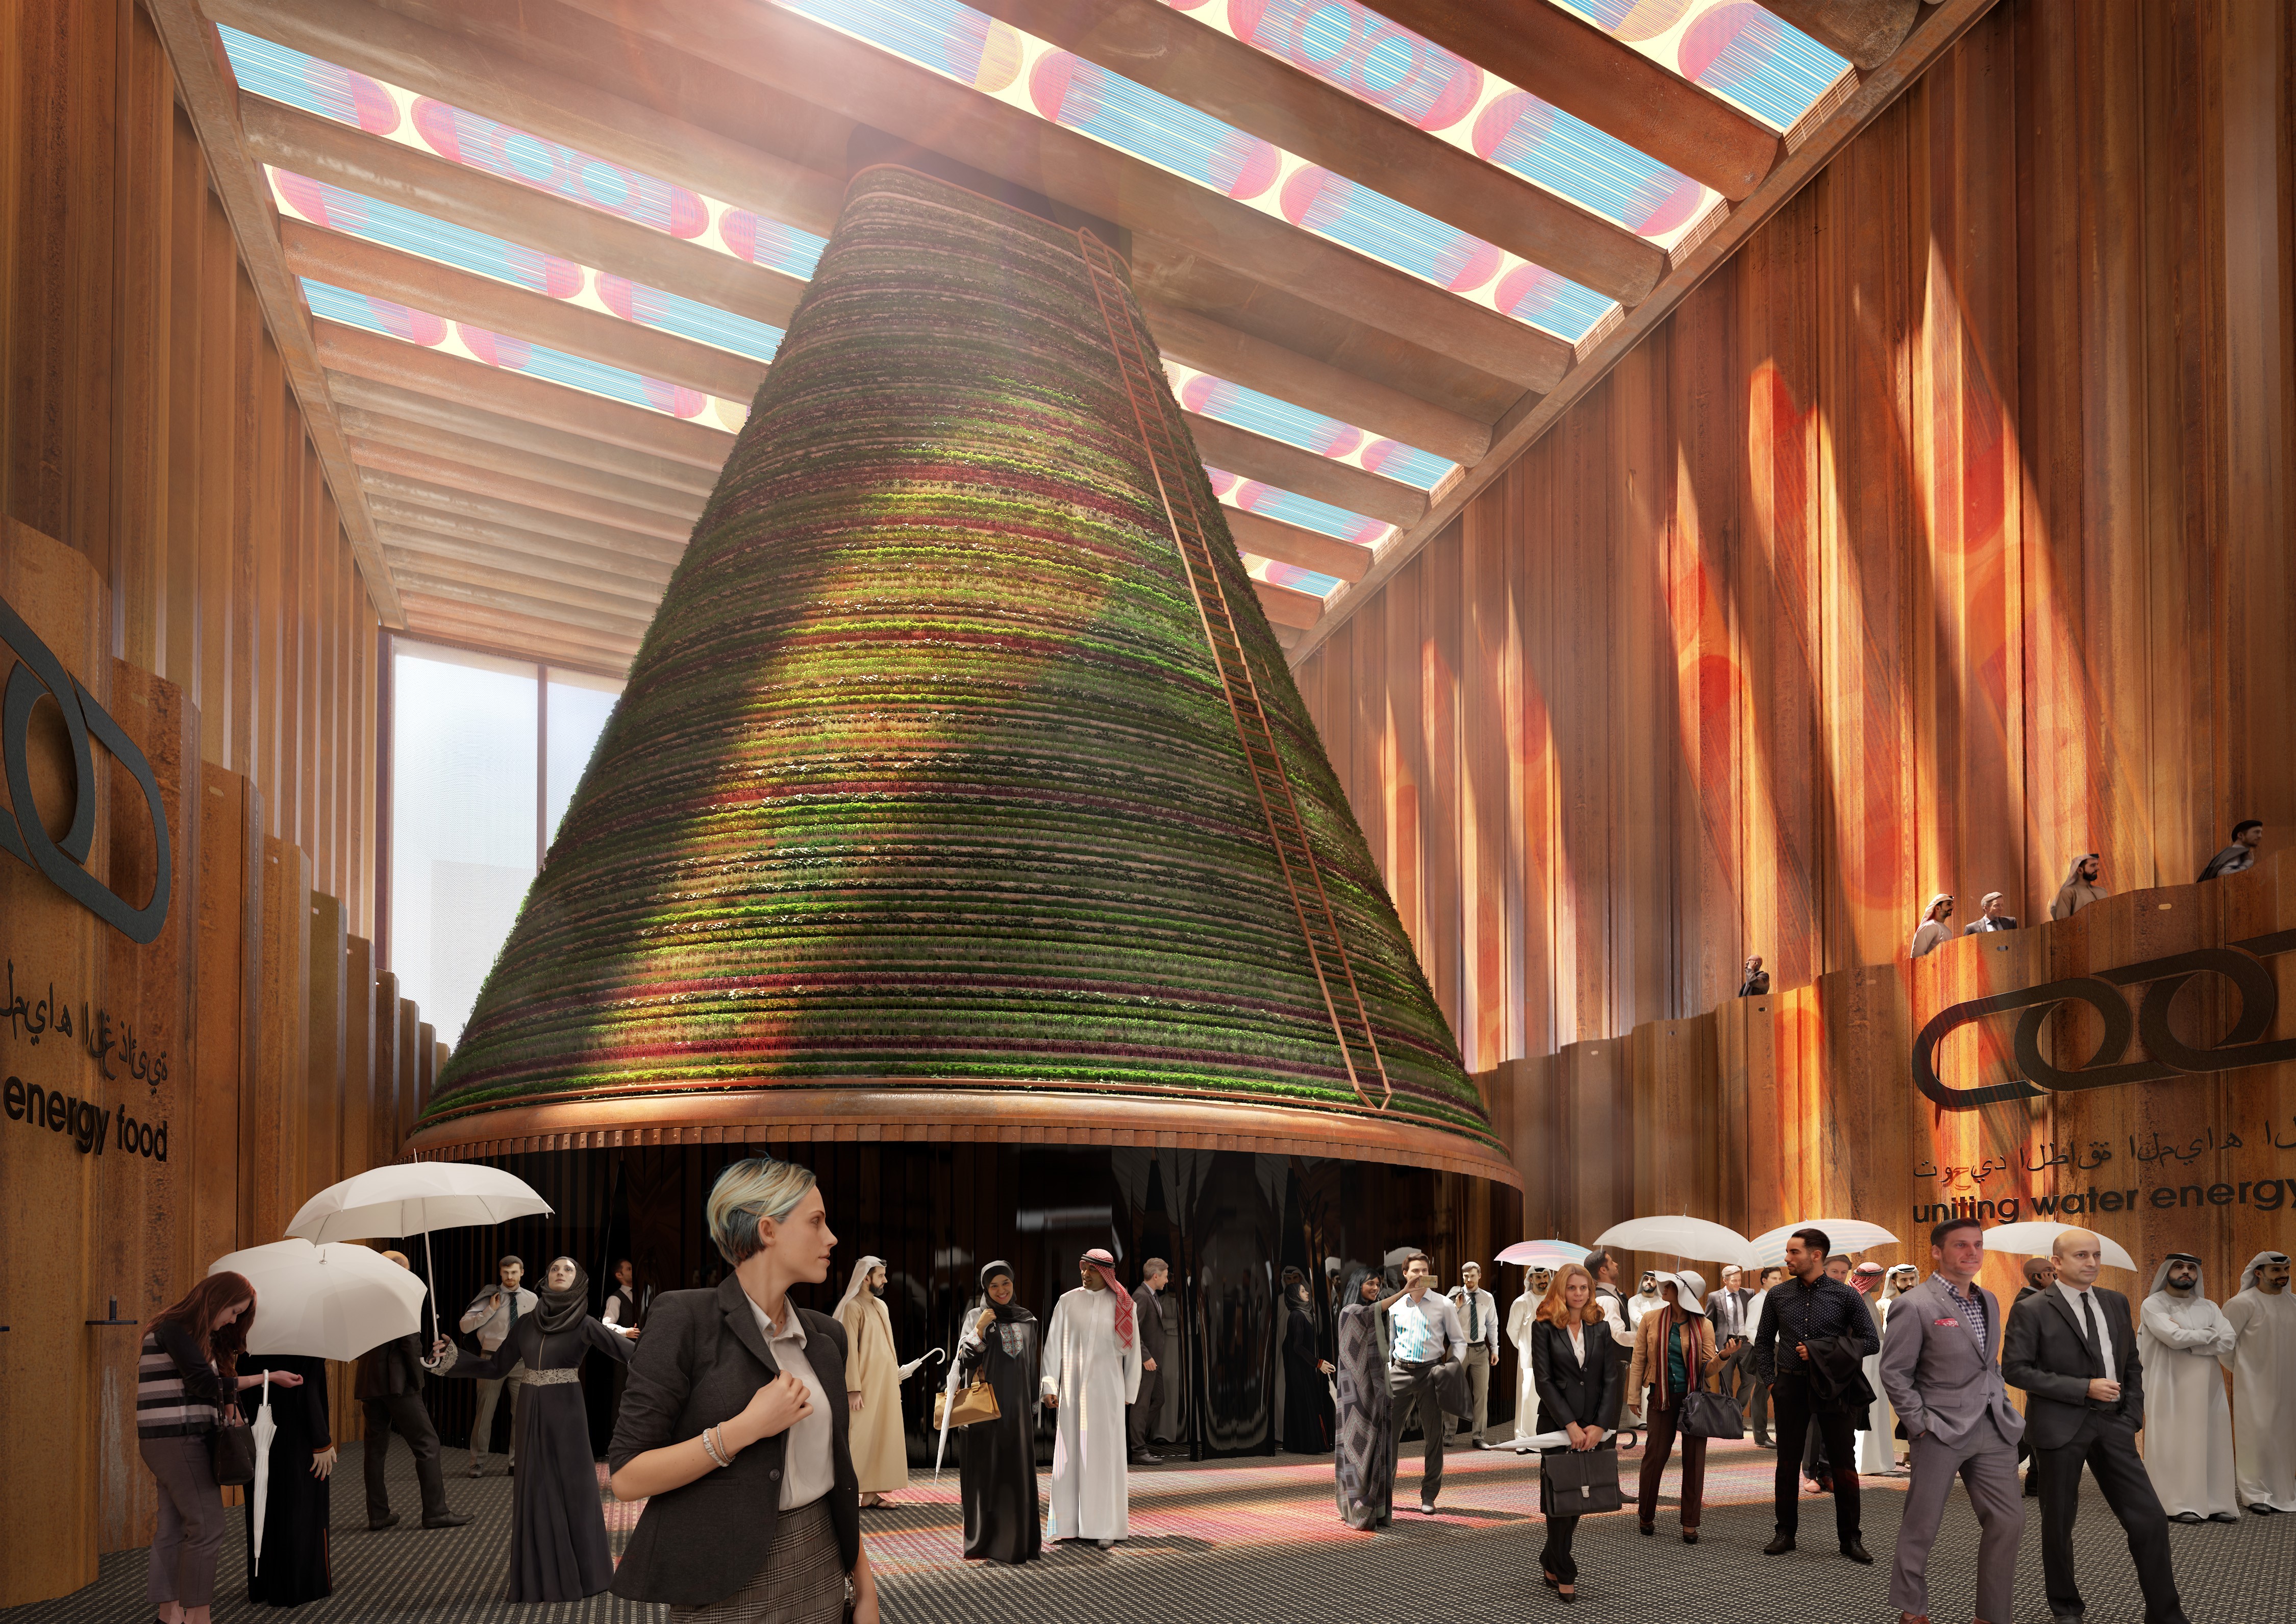 NL pavilion at Expo 2020